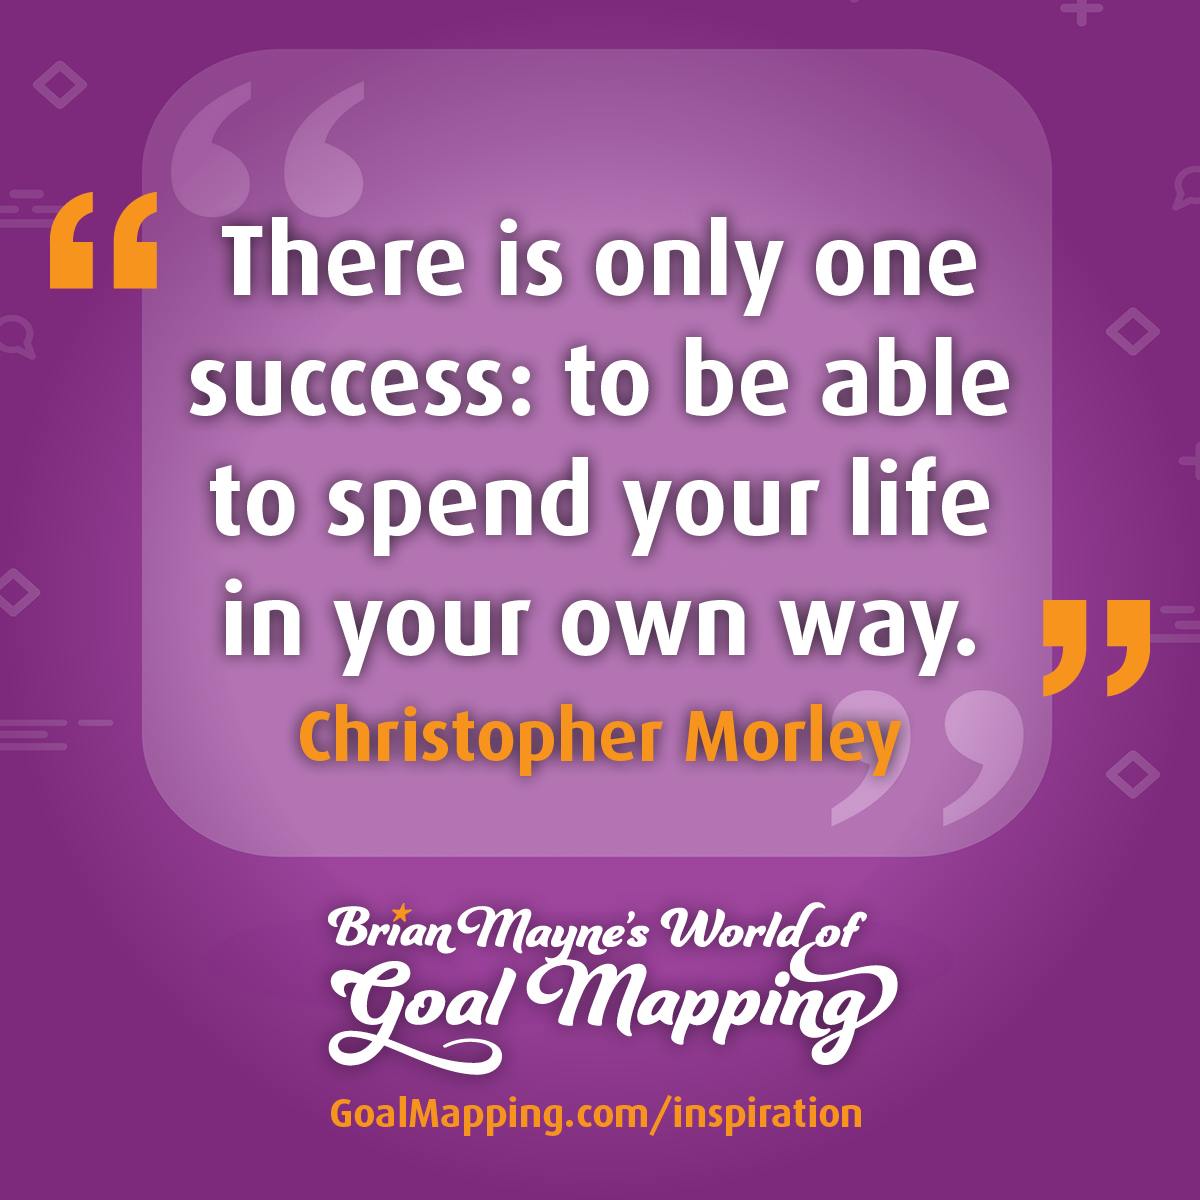 "There is only one success: to be able to spend your life in your own way." Christopher Morley